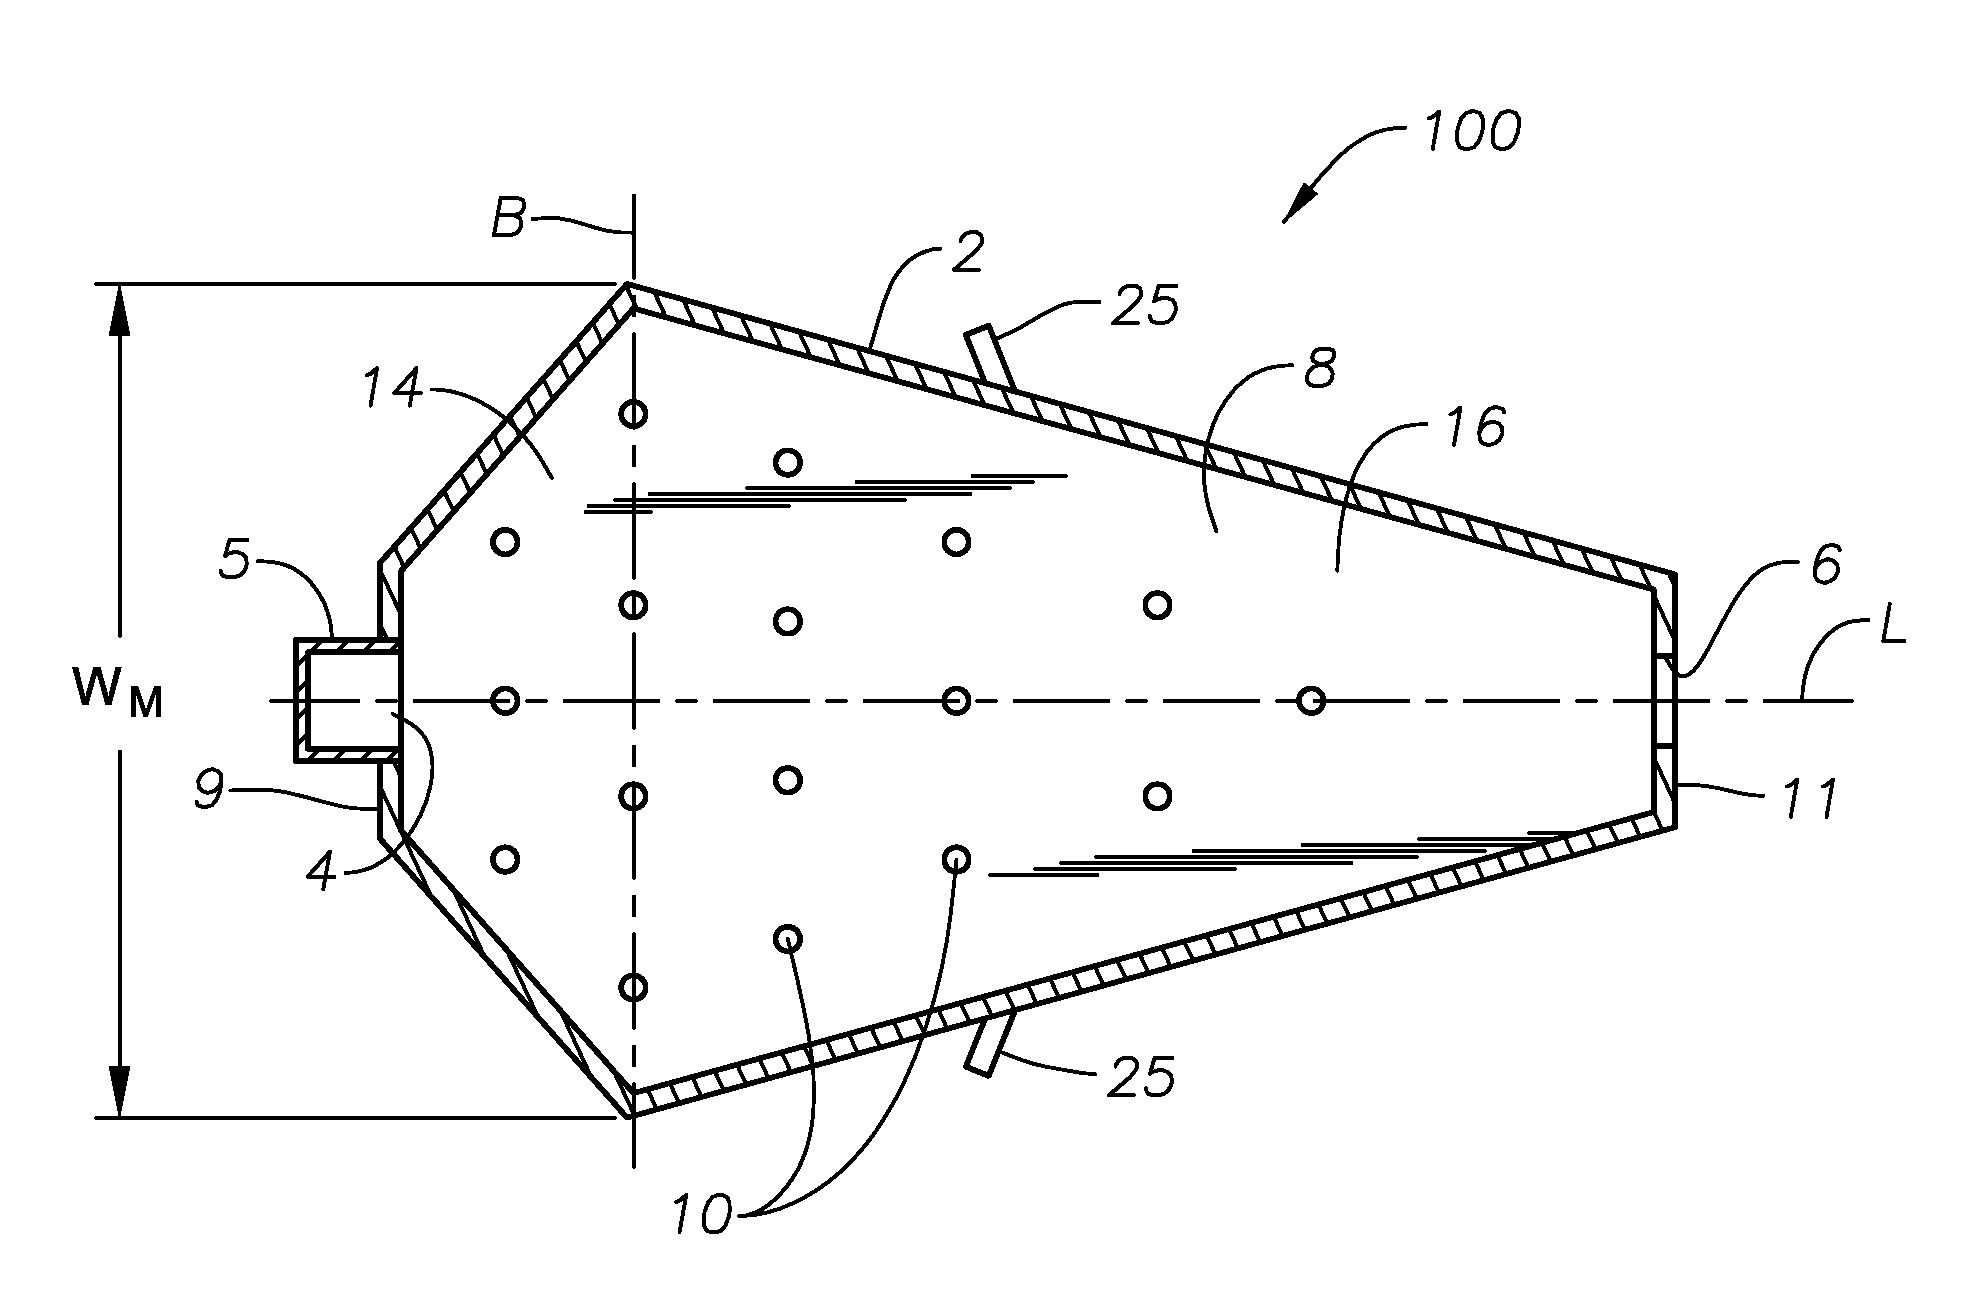 Panel-cooled submerged combustion melter geometry and methods of making molten glass